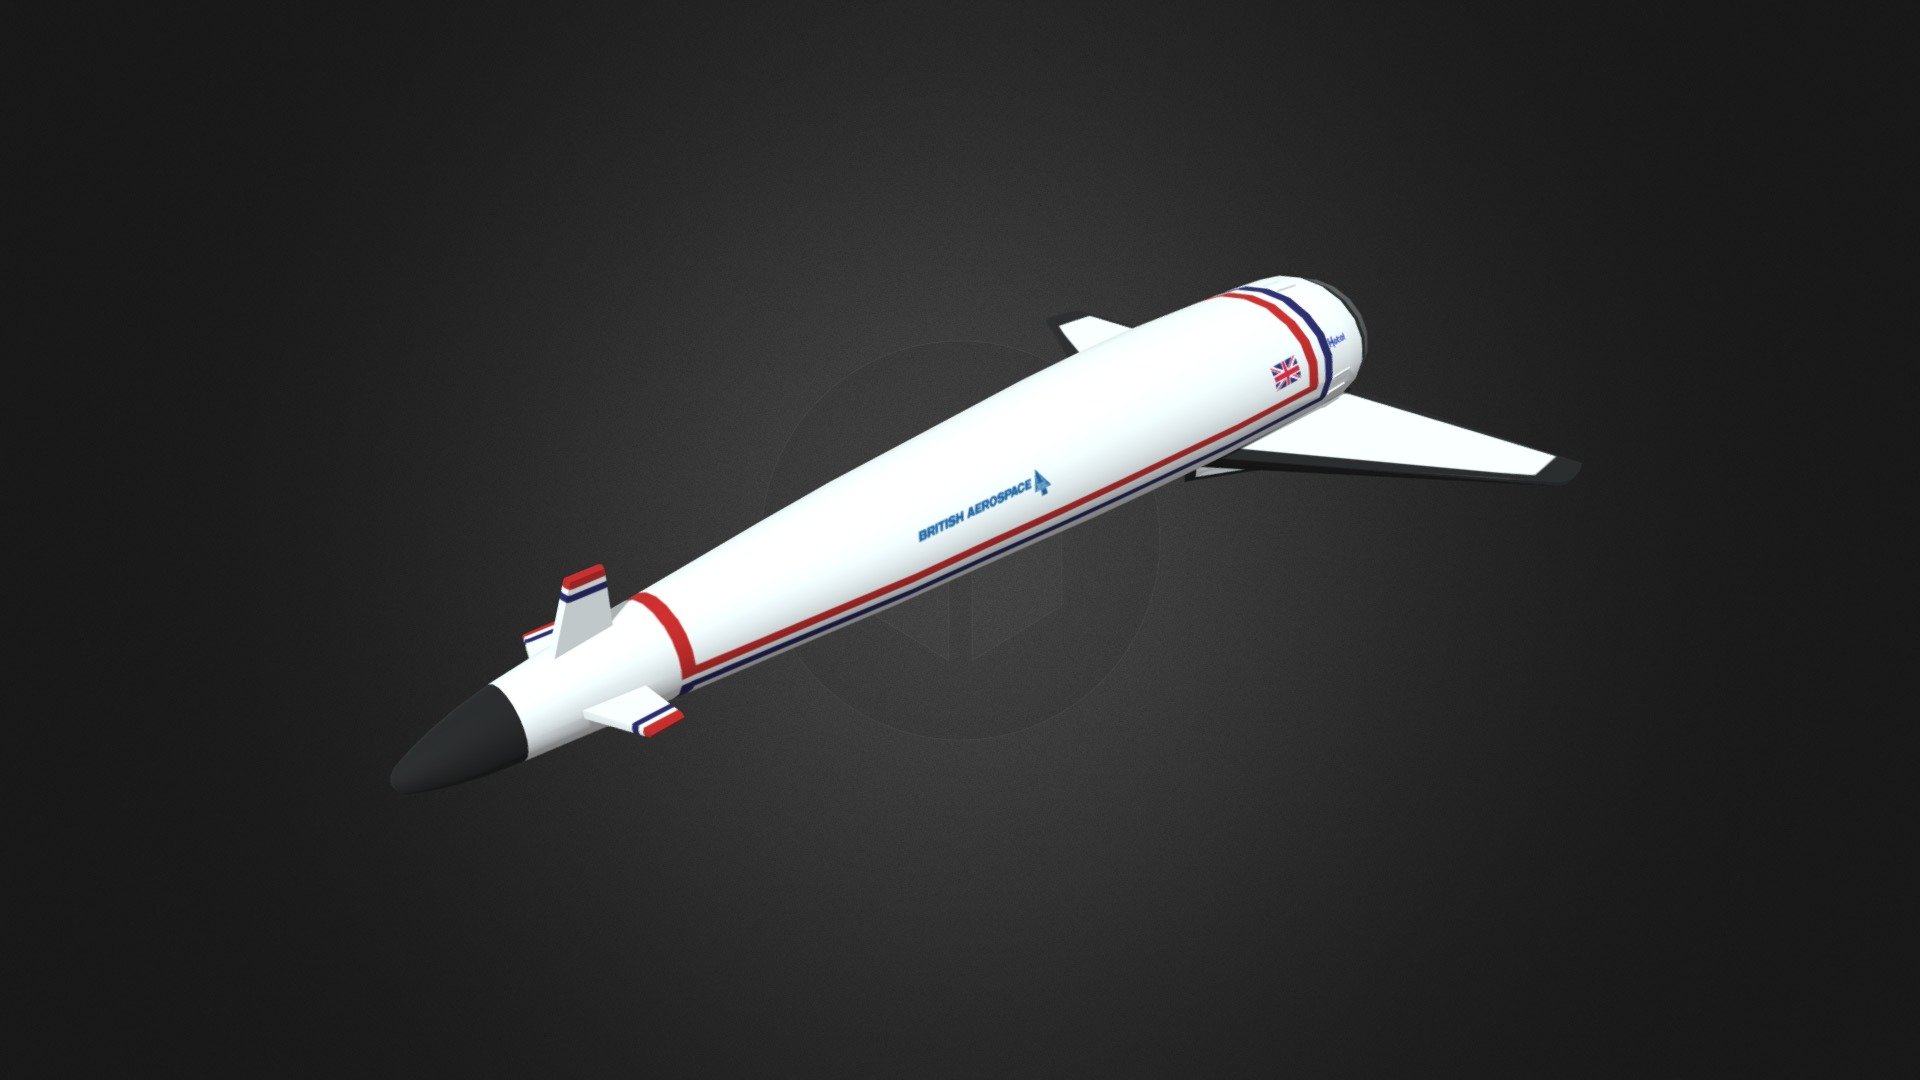 A 3d model of the HOTOL spacecraft.

HOTOL, for Horizontal Take-Off and Landing, was a 1980s British design for a single-stage-to-orbit (SSTO) spaceplane that was to be powered by an airbreathing jet engine.

Proportions Saved 3D model.

Contains following file types: MAX, 3DS, OBJ, and FBX 3d model